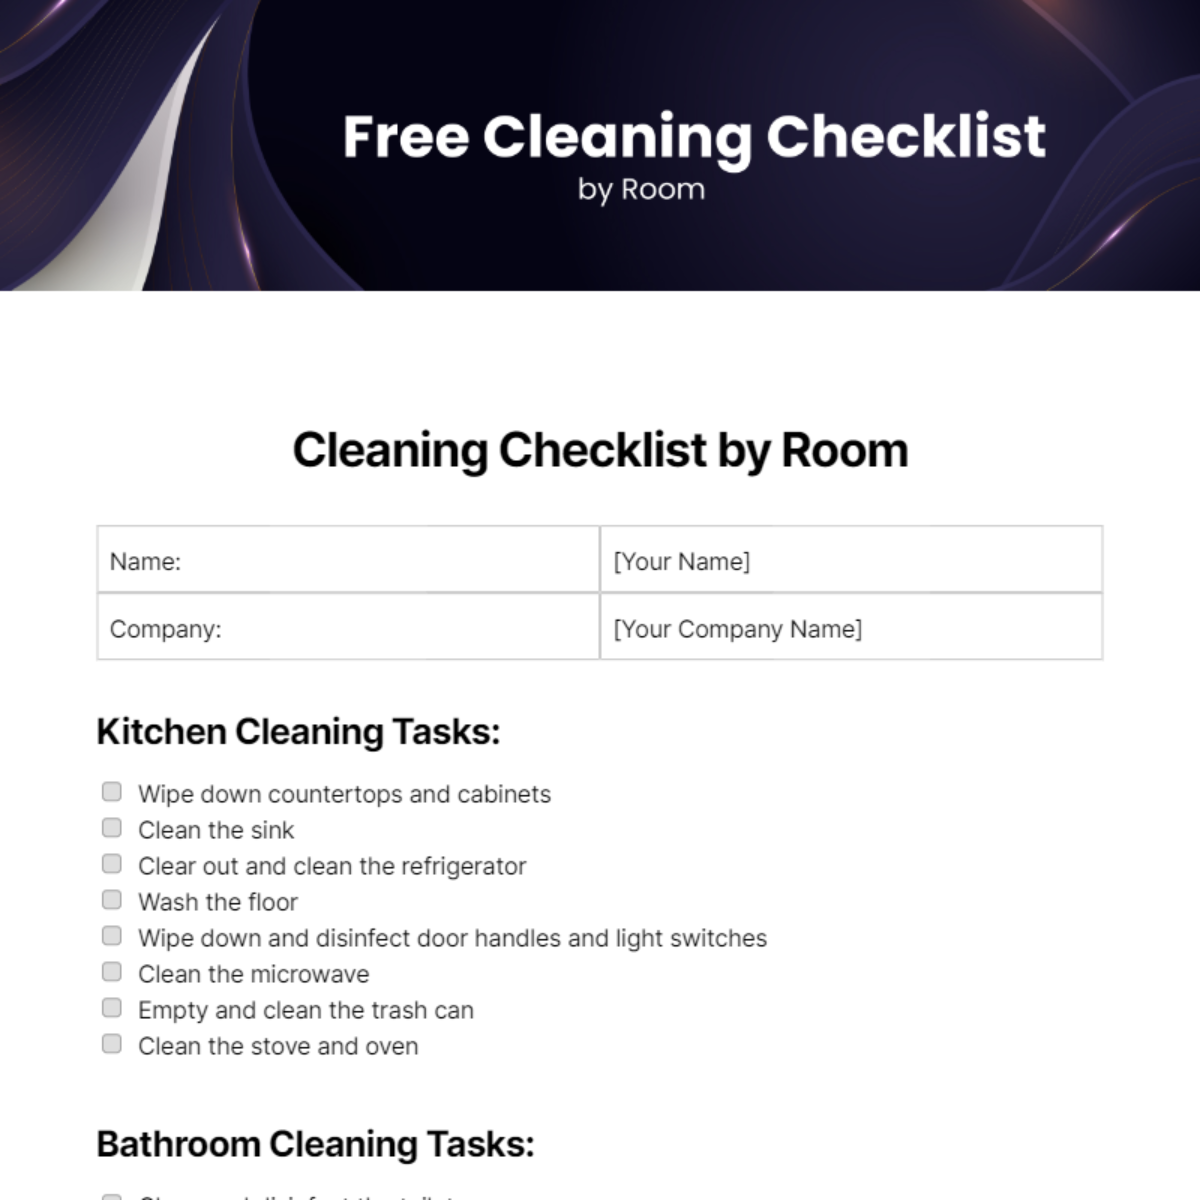 Free Cleaning Checklist By Room Template